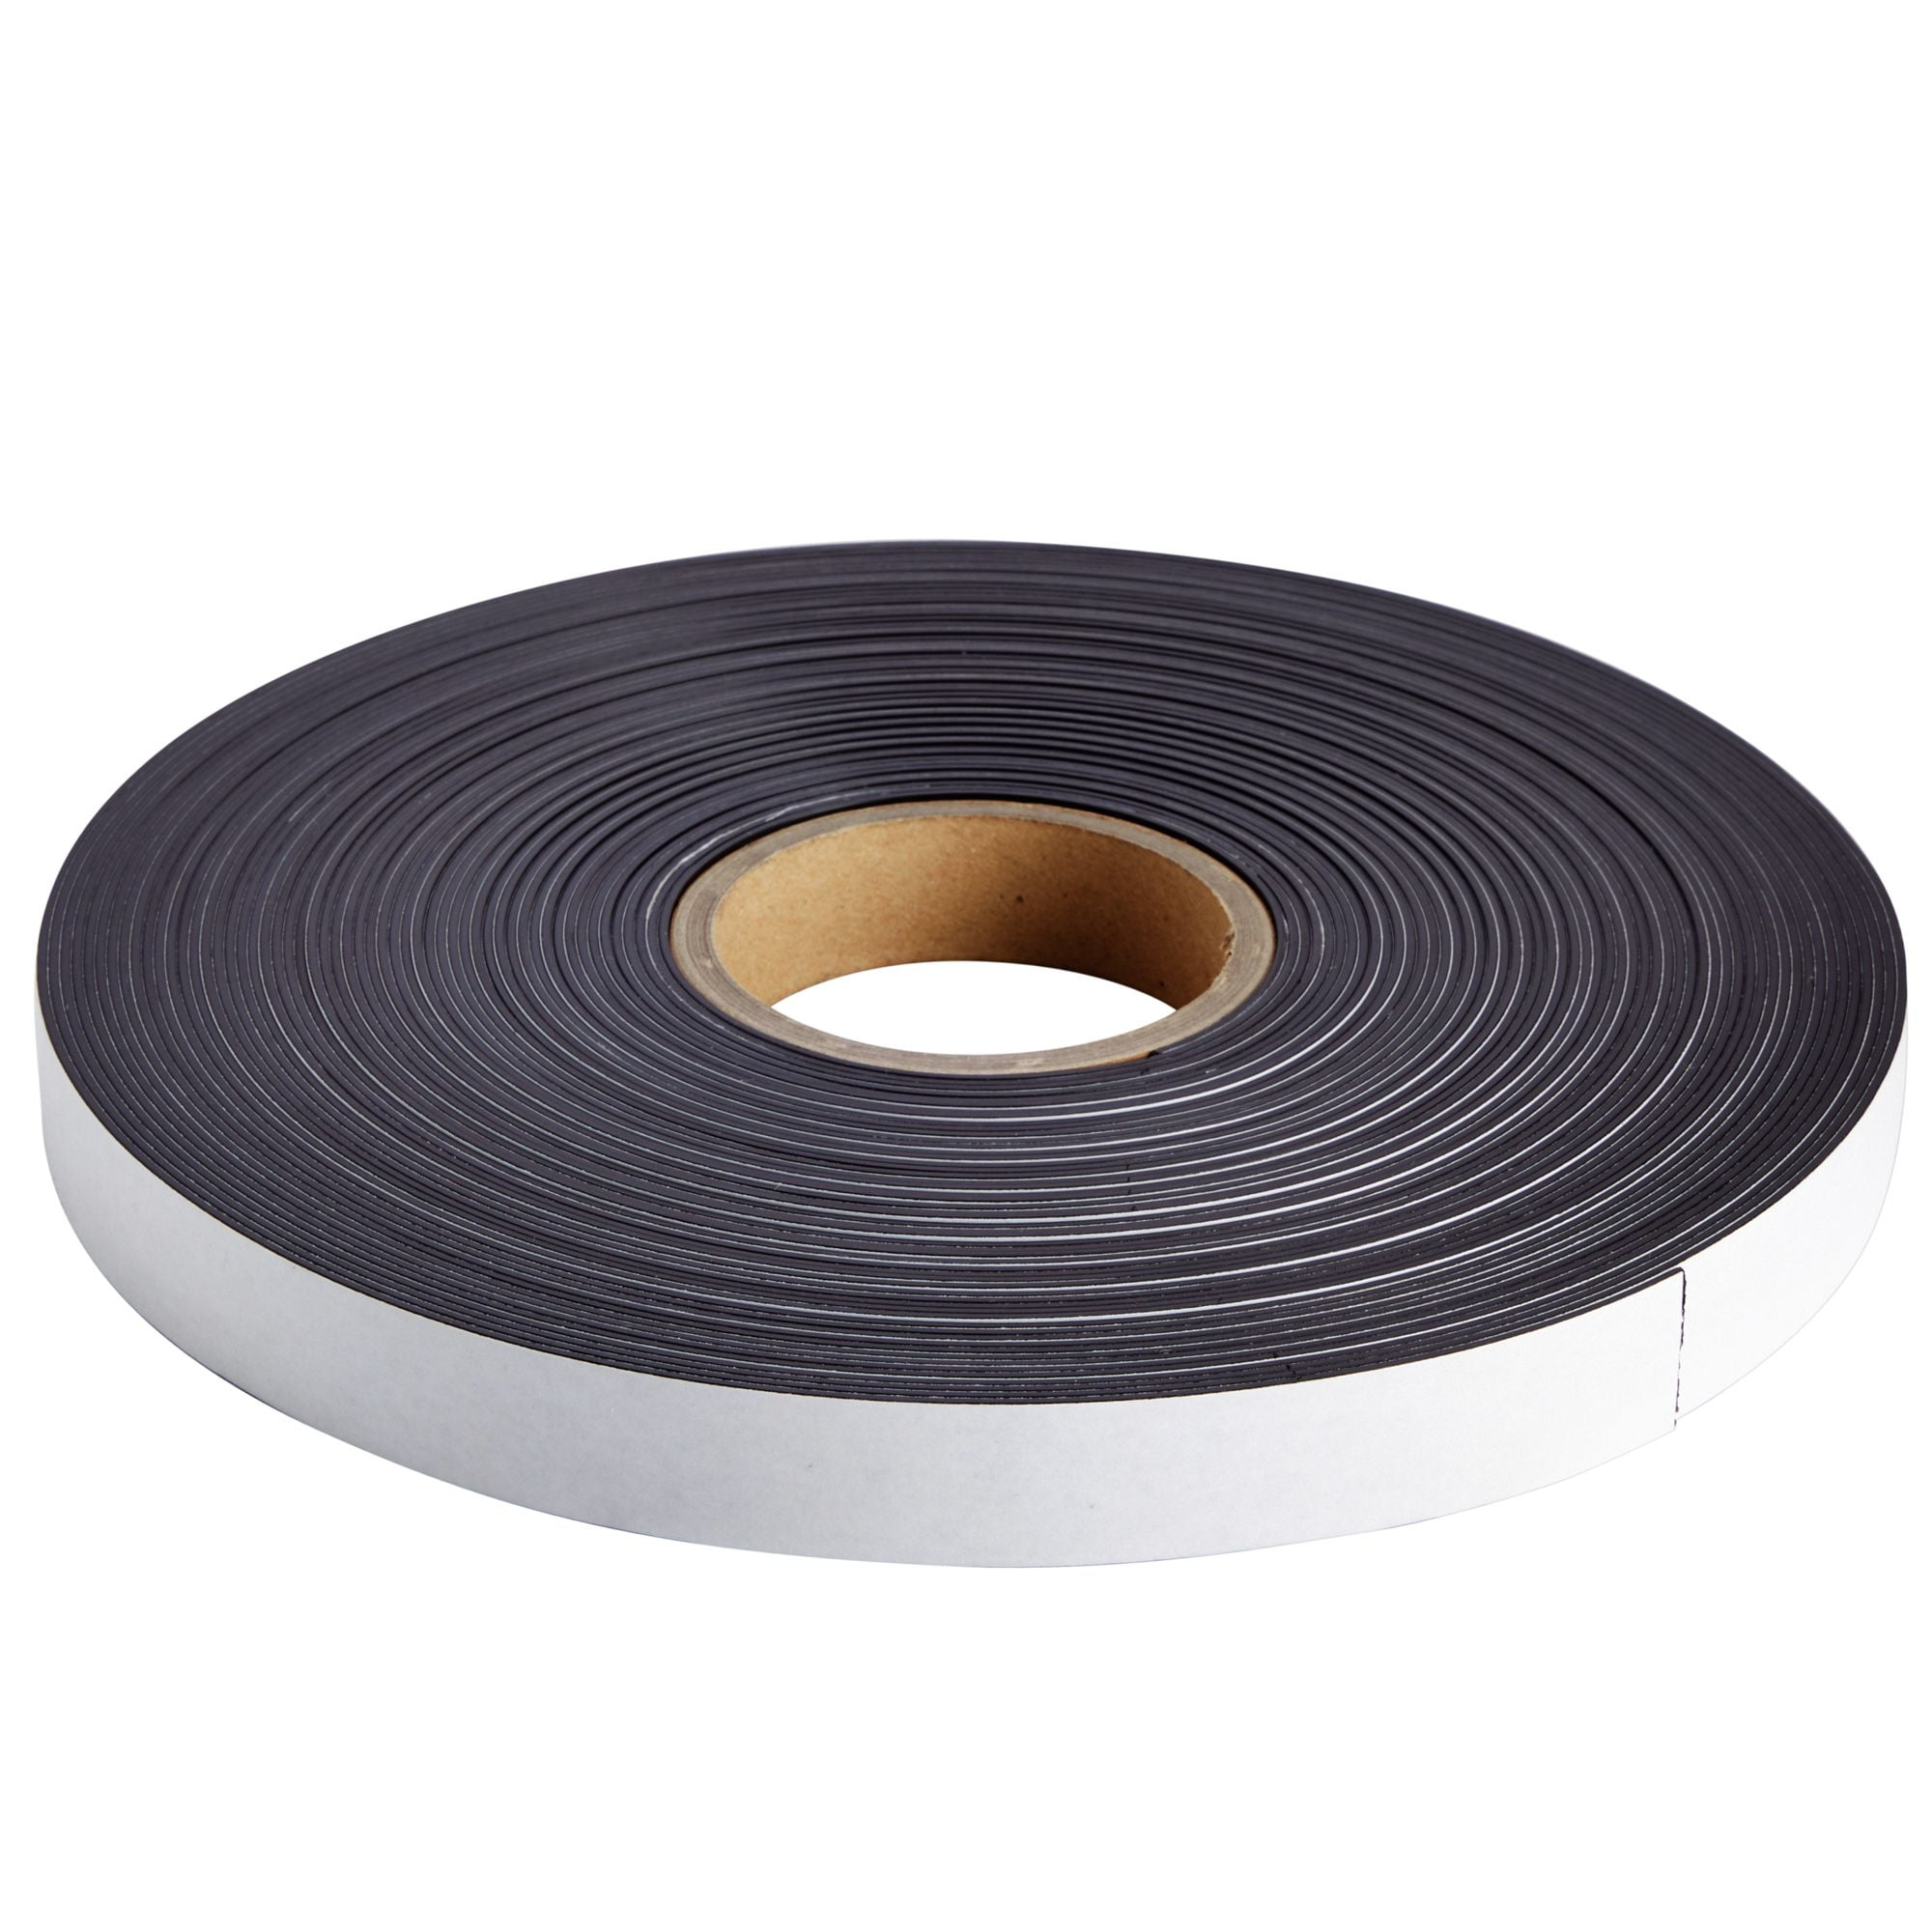 Flexible Magnetic Tape - 1 inch x 10 Feet Magnetic Strip with Strong Self Adhesive - Ideal Magnetic Roll for Craft and DIY Projects - Sticky Magnets